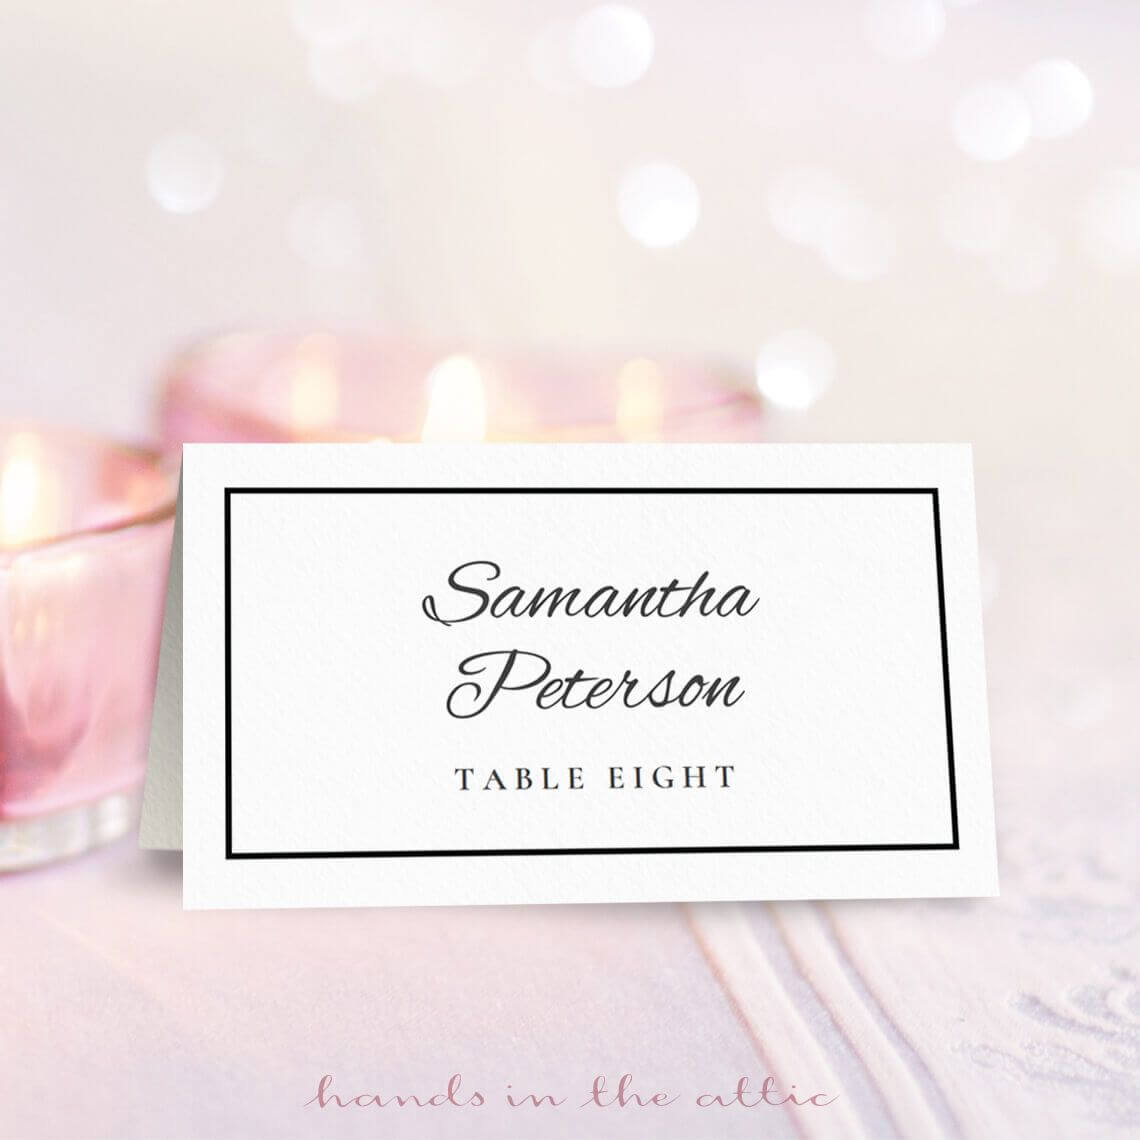 013 Free Place Card Template Templates Word Excellent Ideas In Free Place Card Templates 6 Per Page